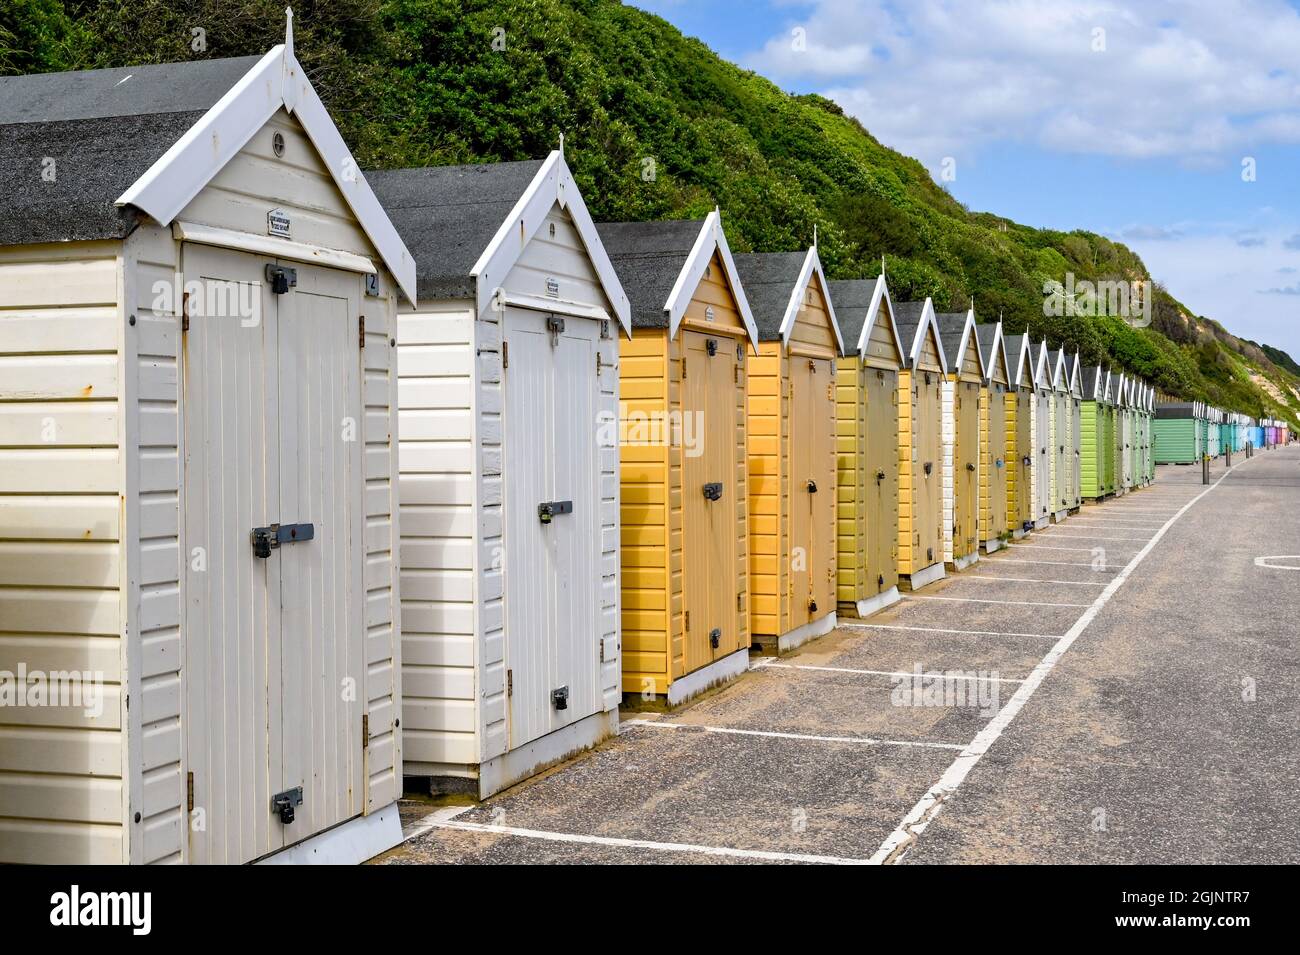 Bournemouth, Dorset, England - June 2021: Long row of beach huts below the cliffs in Bournemouth Stock Photo